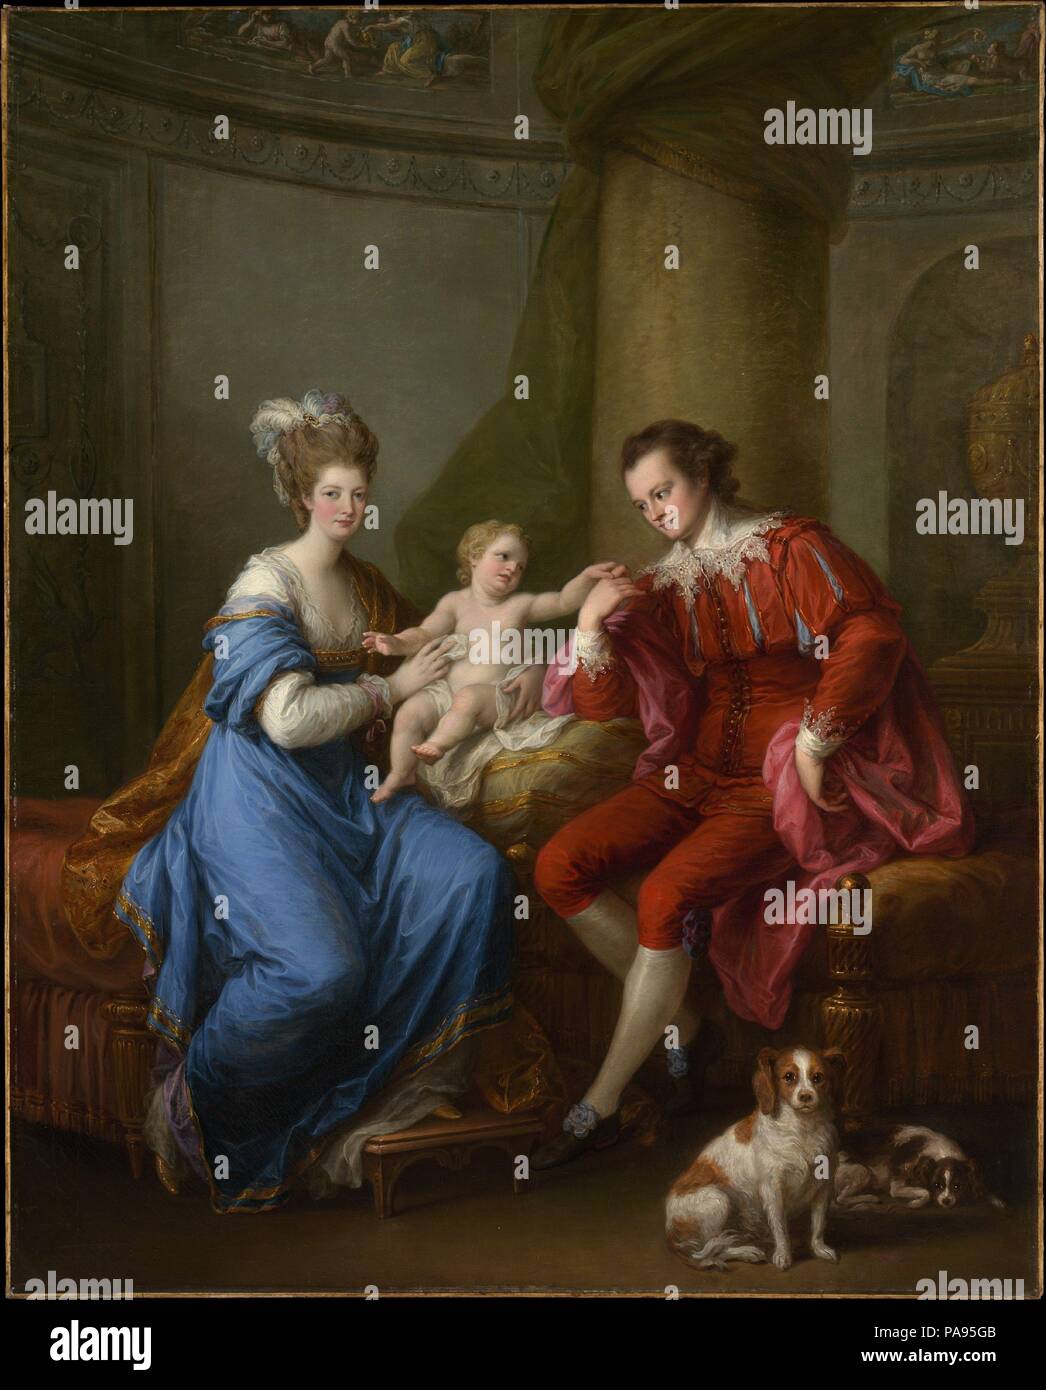 Edward Smith Stanley (1752-1834), Twelfth Earl of Derby, with His First Wife (Lady Elizabeth Hamilton, 1753-1797) and Their Son (Edward Smith Stanley, 1775-1851). Artist: Angelica Kauffmann (Swiss, Chur 1741-1807 Rome). Dimensions: 50 x 40 in. (127 x 101.6 cm). Date: ca. 1776.  The earl and countess of Derby were married in June 1774 and their son, pictured here, was born in April 1775. The picture was probably painted in the following year. It is one of two versions (the other, which is signed, remains with the sitters' descendants). After Lady Derby's death, the earl married Elizabeth Farren Stock Photo